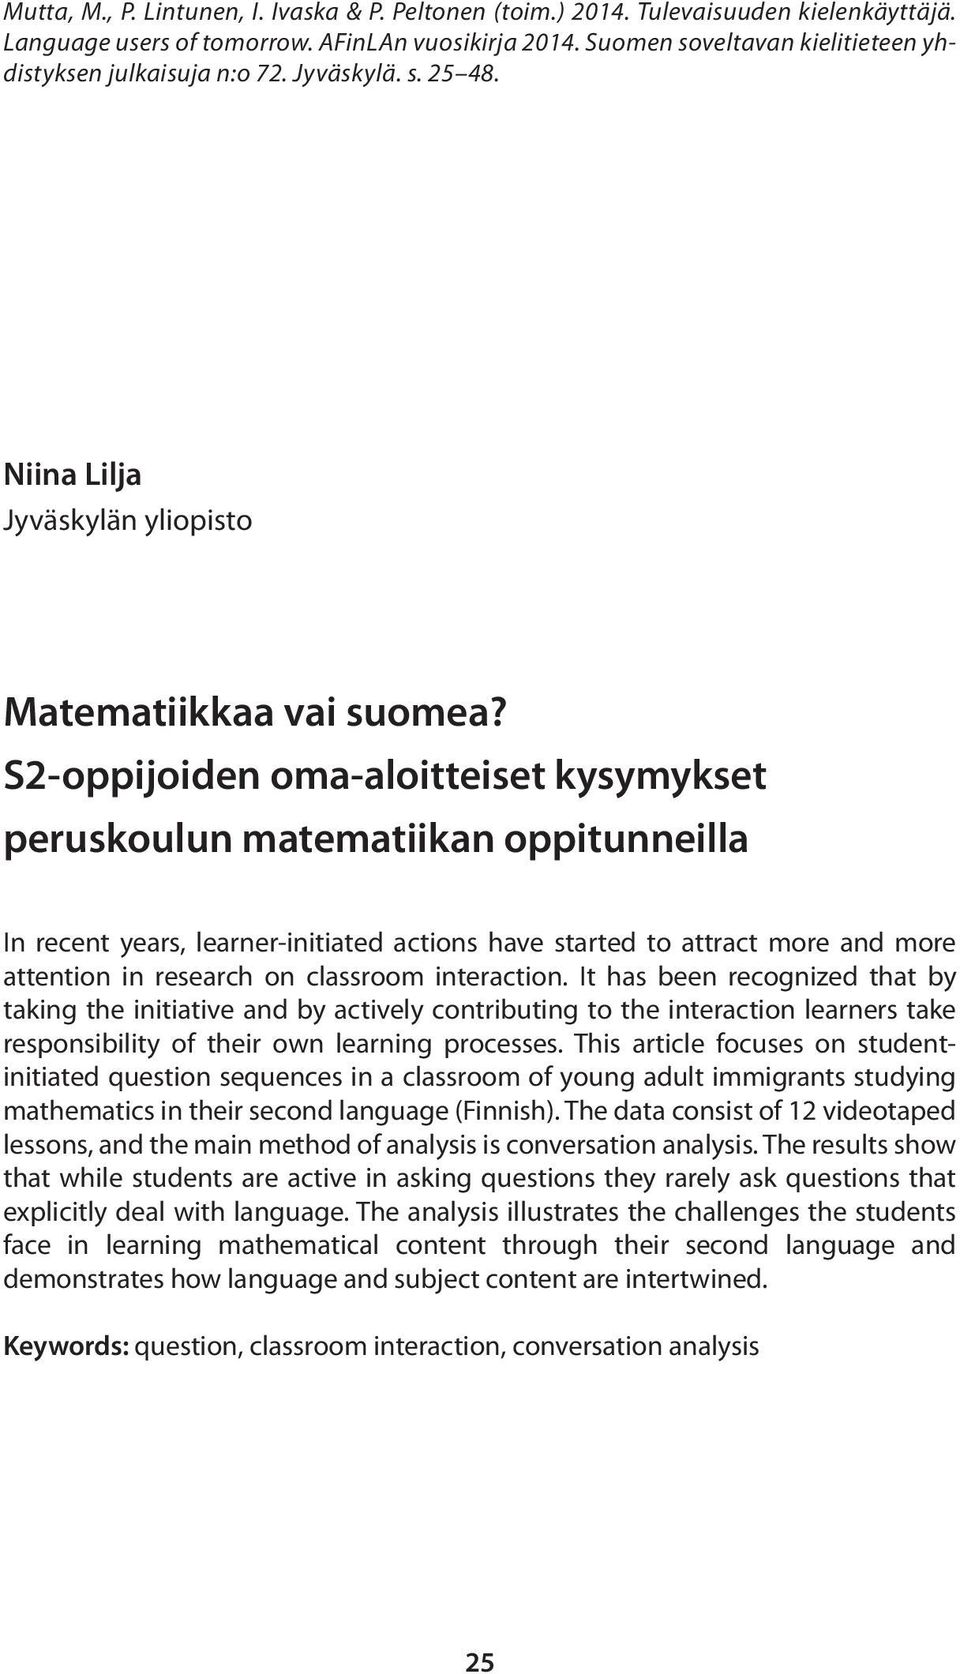 S2-oppijoiden oma-aloitteiset kysymykset peruskoulun matematiikan oppitunneilla In recent years, learner-initiated actions have started to attract more and more attention in research on classroom